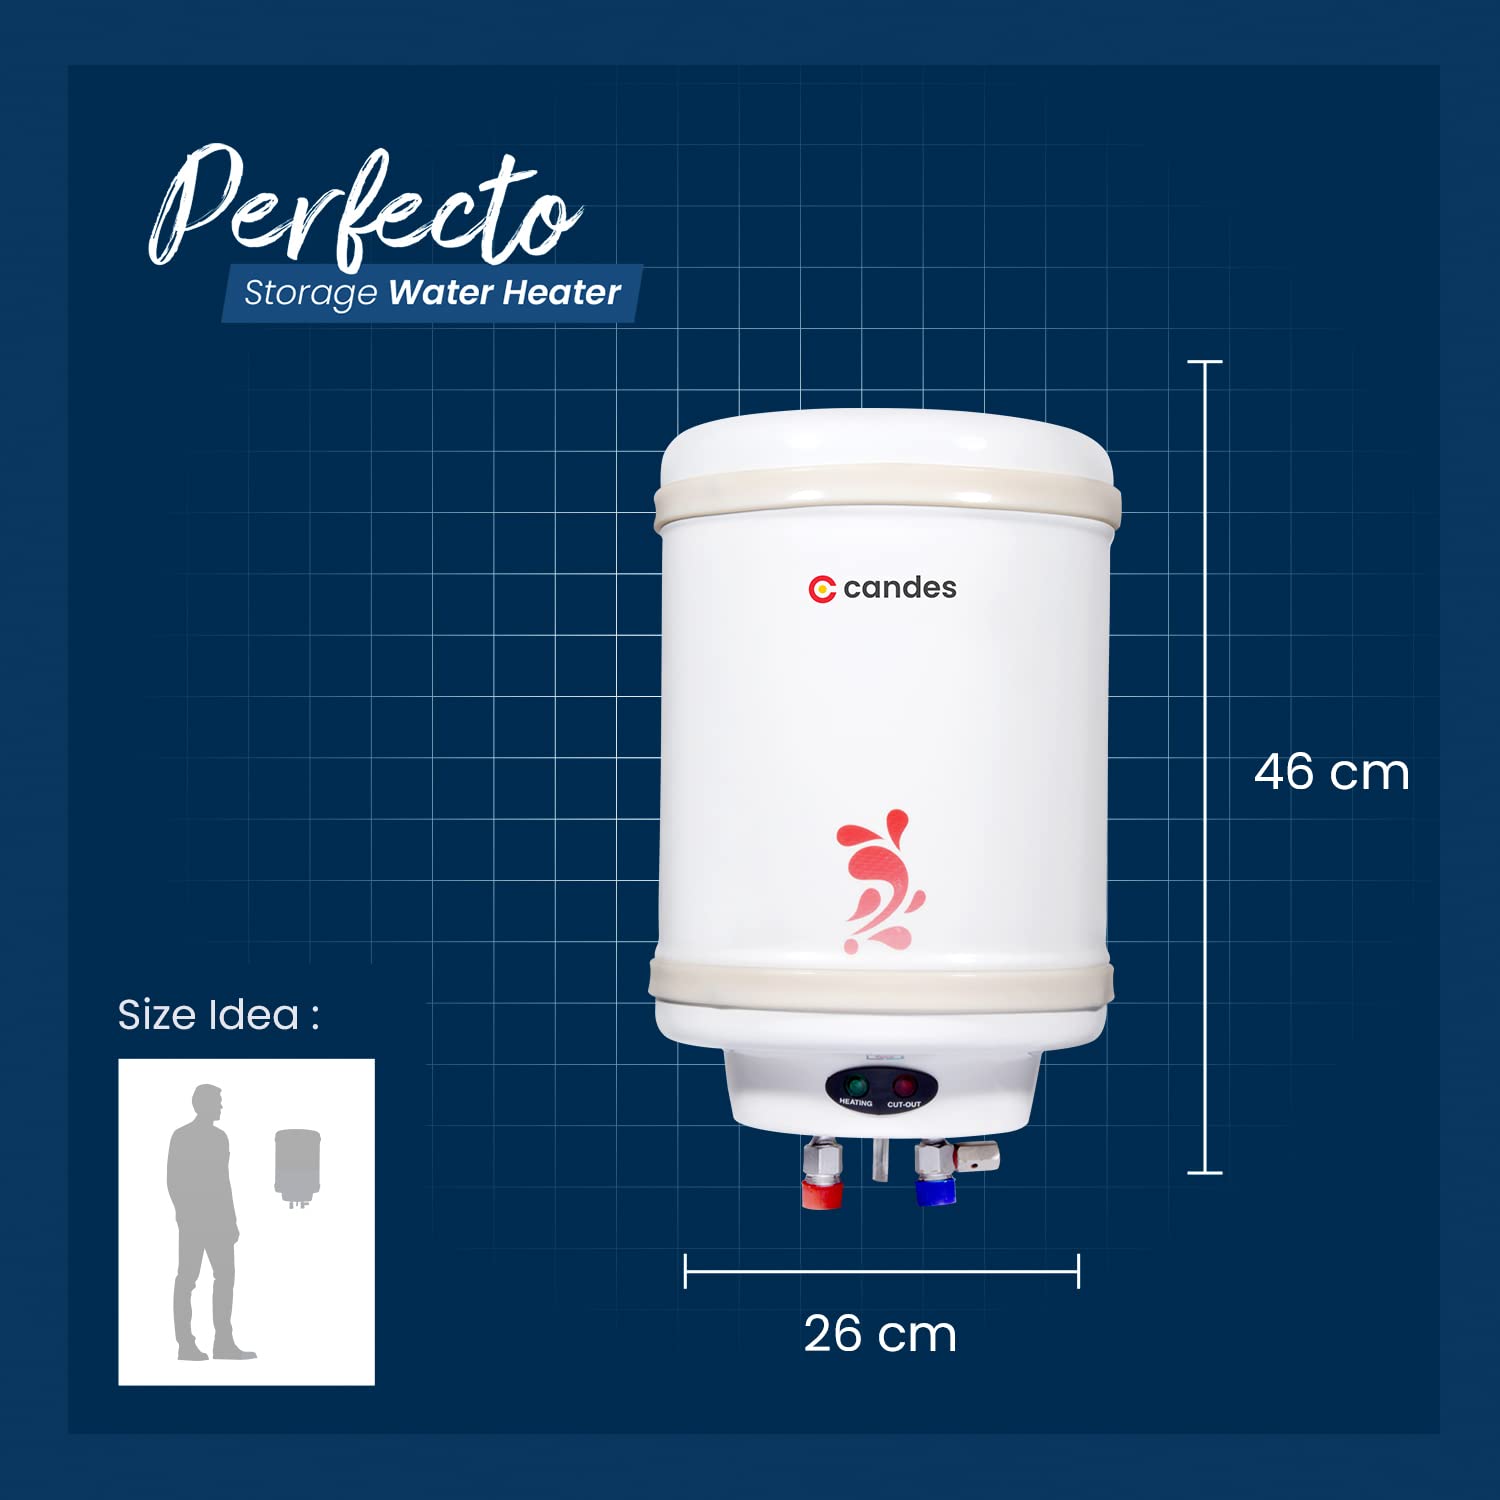 Candes Geyser 10 Litre | 1 Year Warranty | Water Heater for Home, Water Geyser, Water Heater, Electric Geyser, 5 Star Rated Automatic Instant Storage Water Heater, 2KW - Perfecto (Ivory)